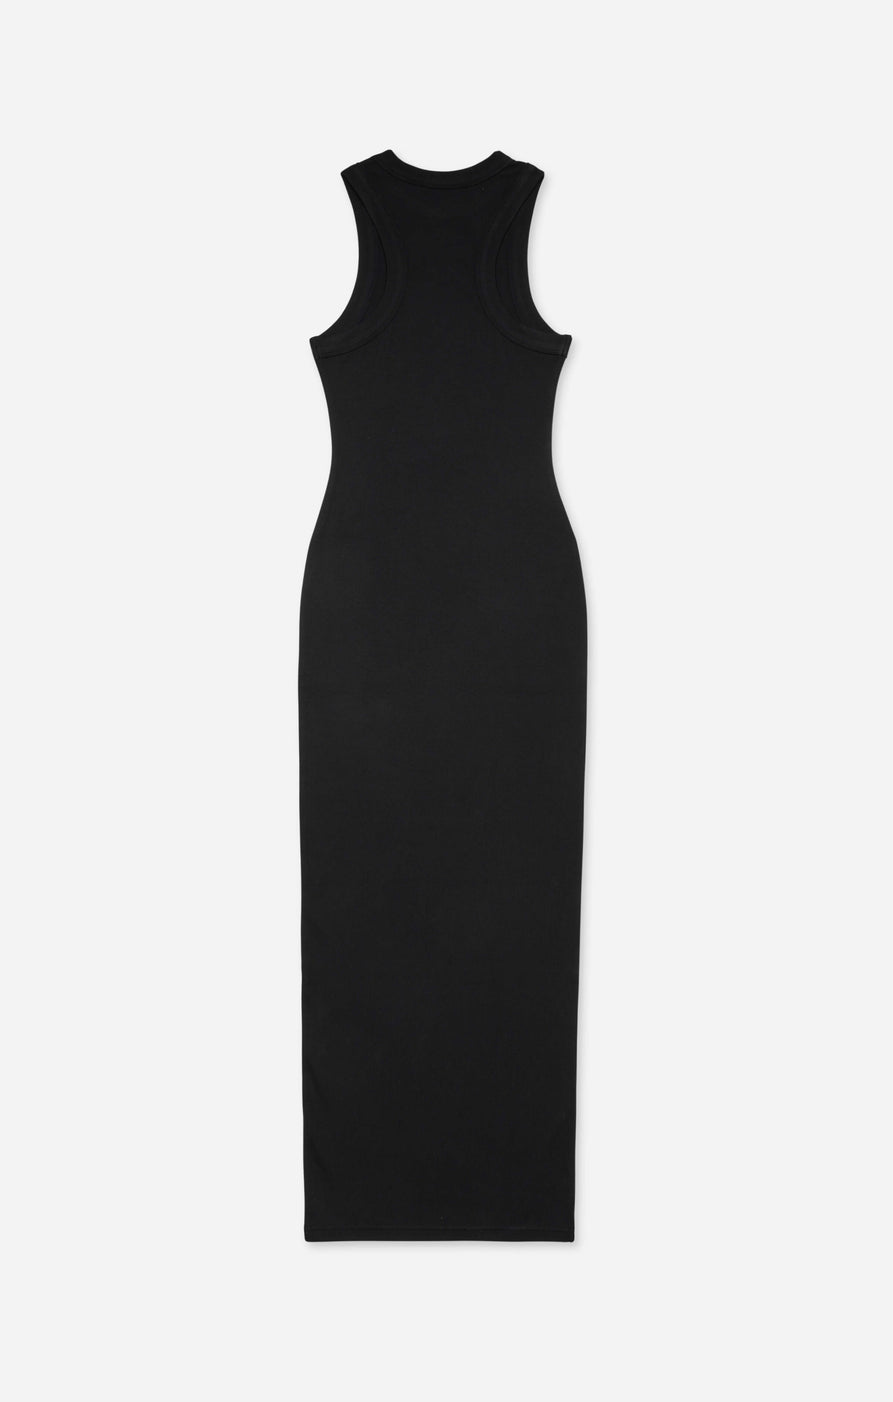 THE LUXE RIB HIGH NECK TANK - BLACK – All Things Golden